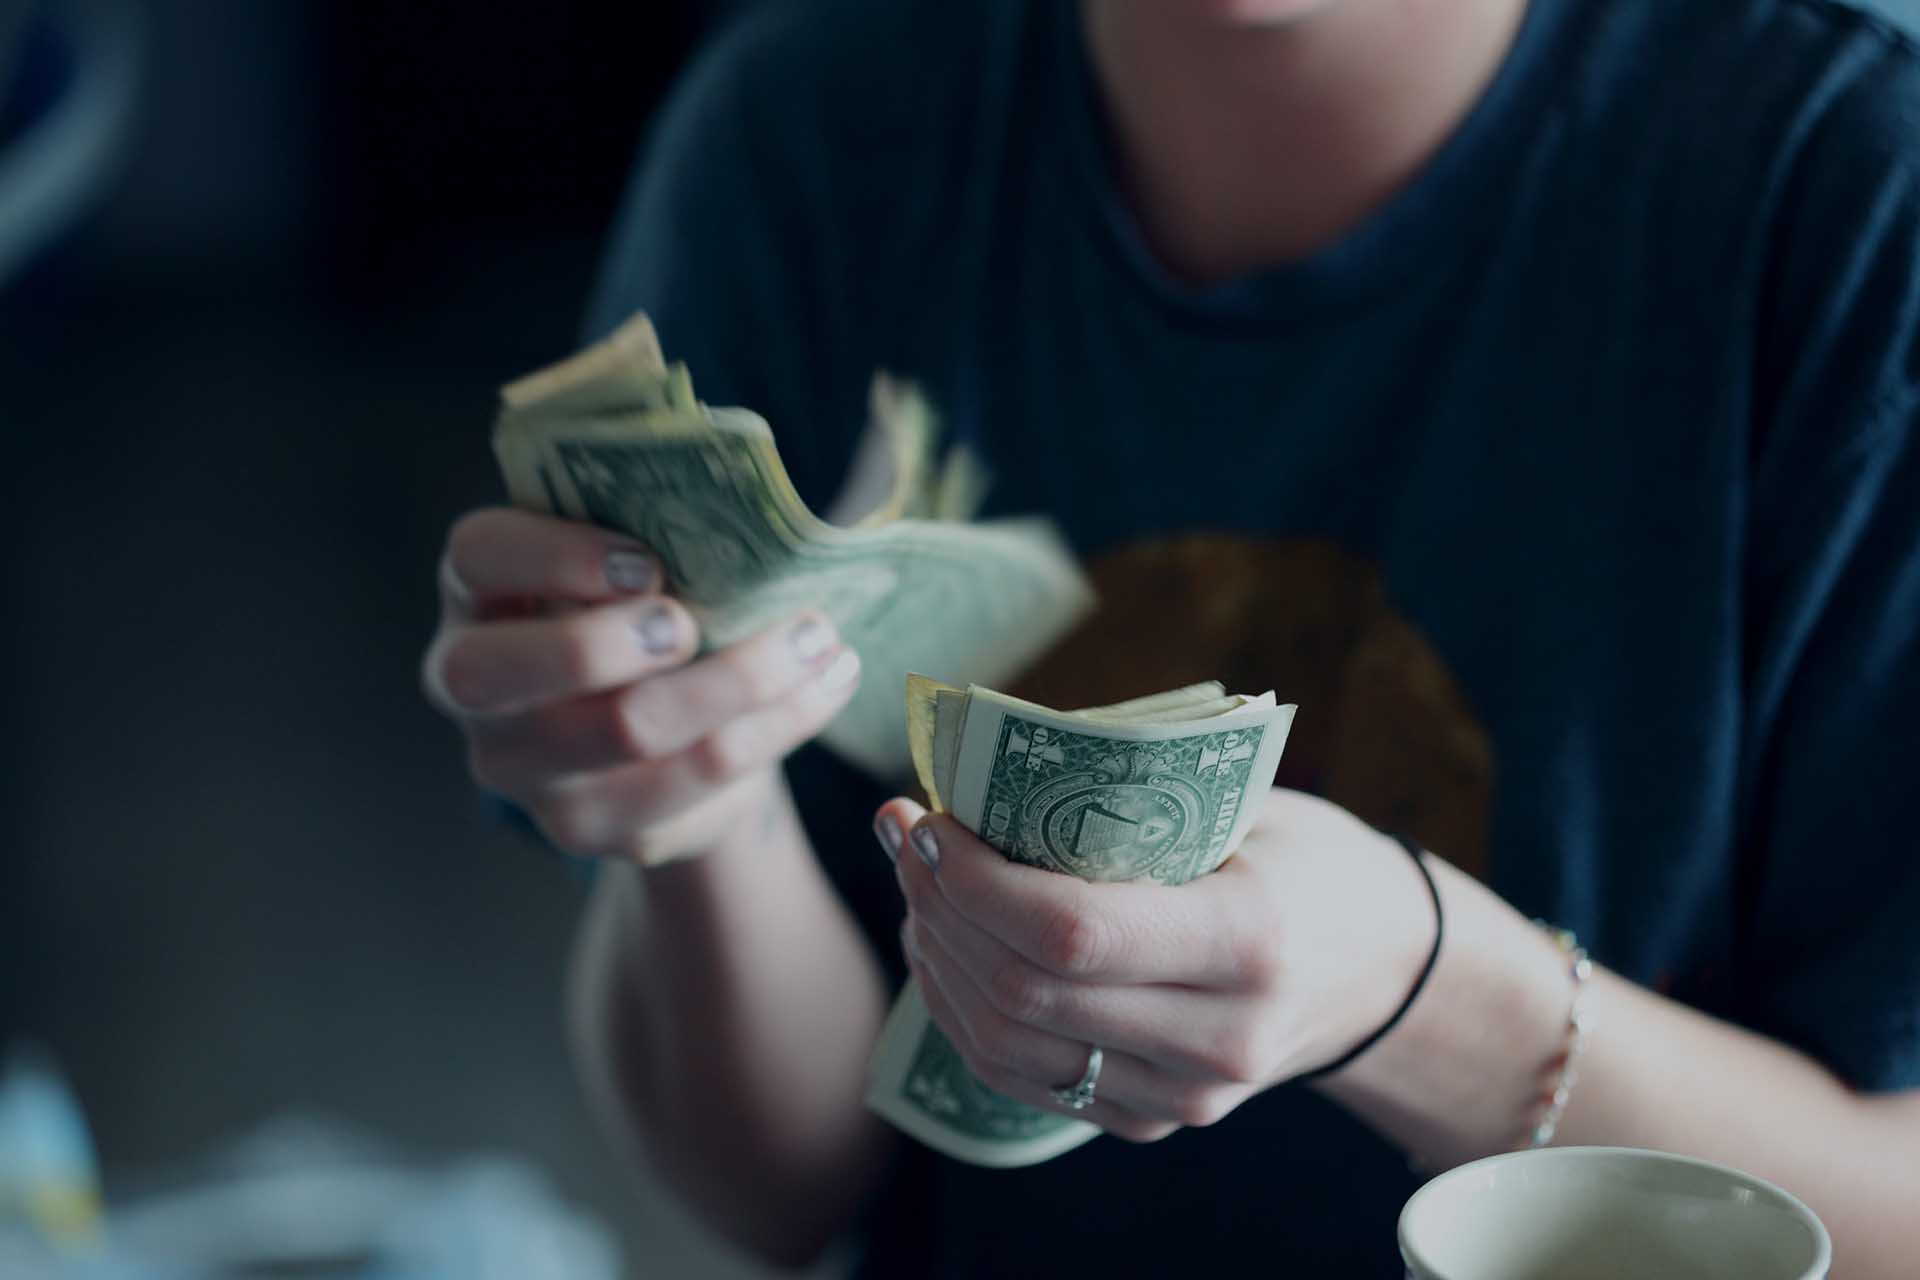 Woman in dark t-shirt counting dollar bills in her hand